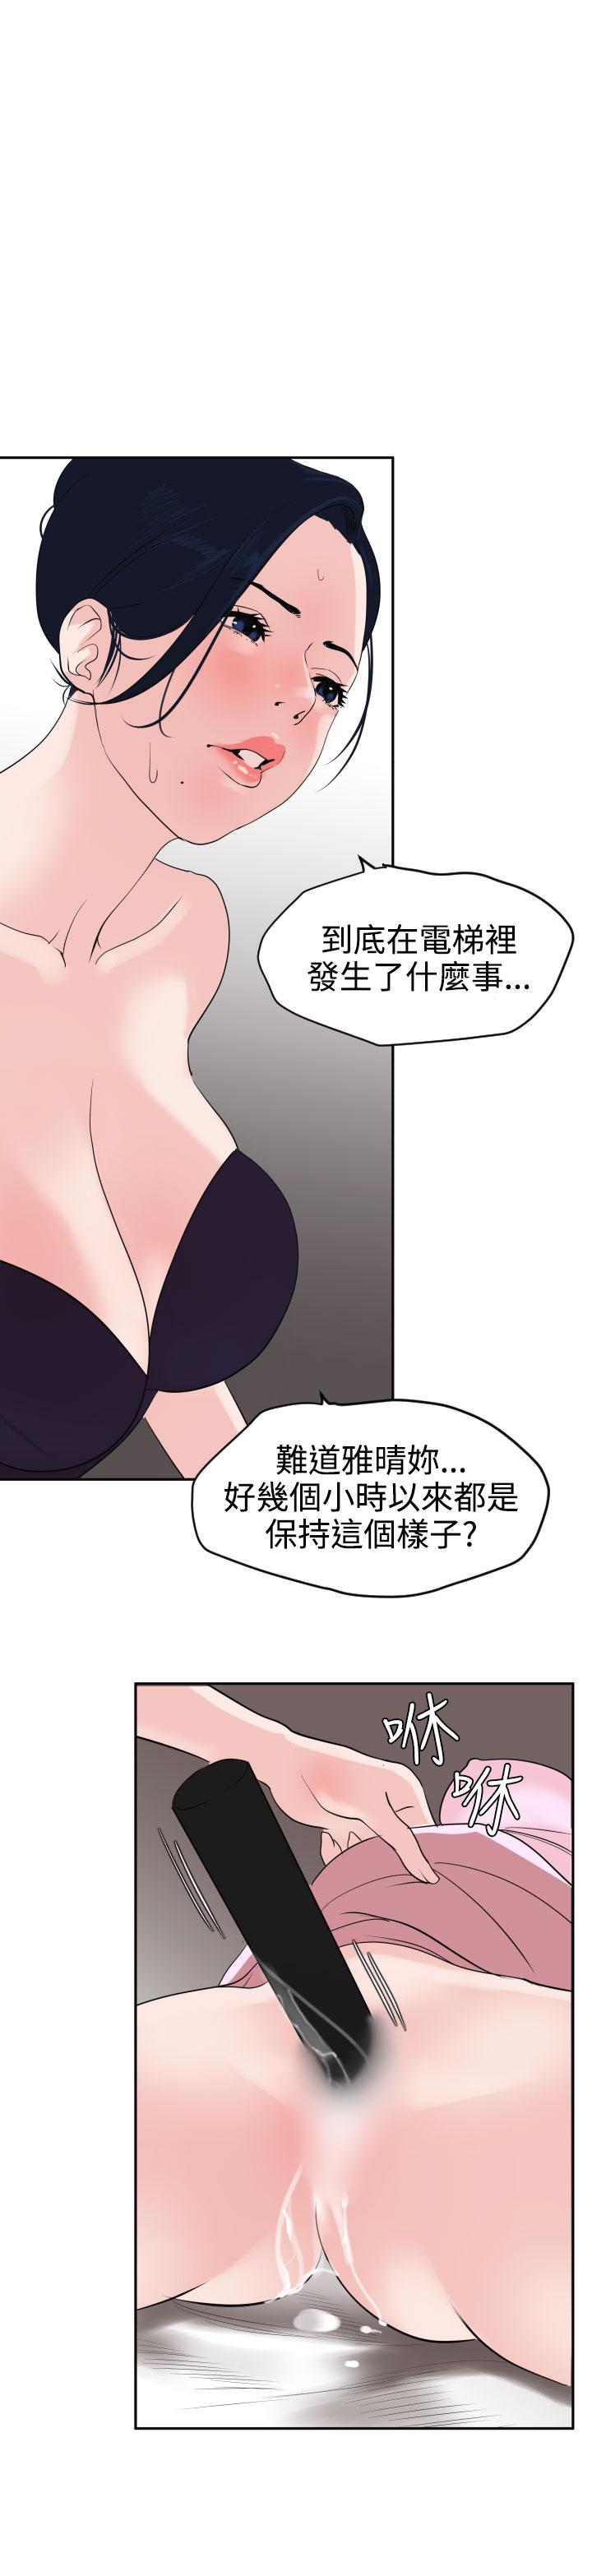 Desire King (慾求王) Ch.1-16 (chinese) 446